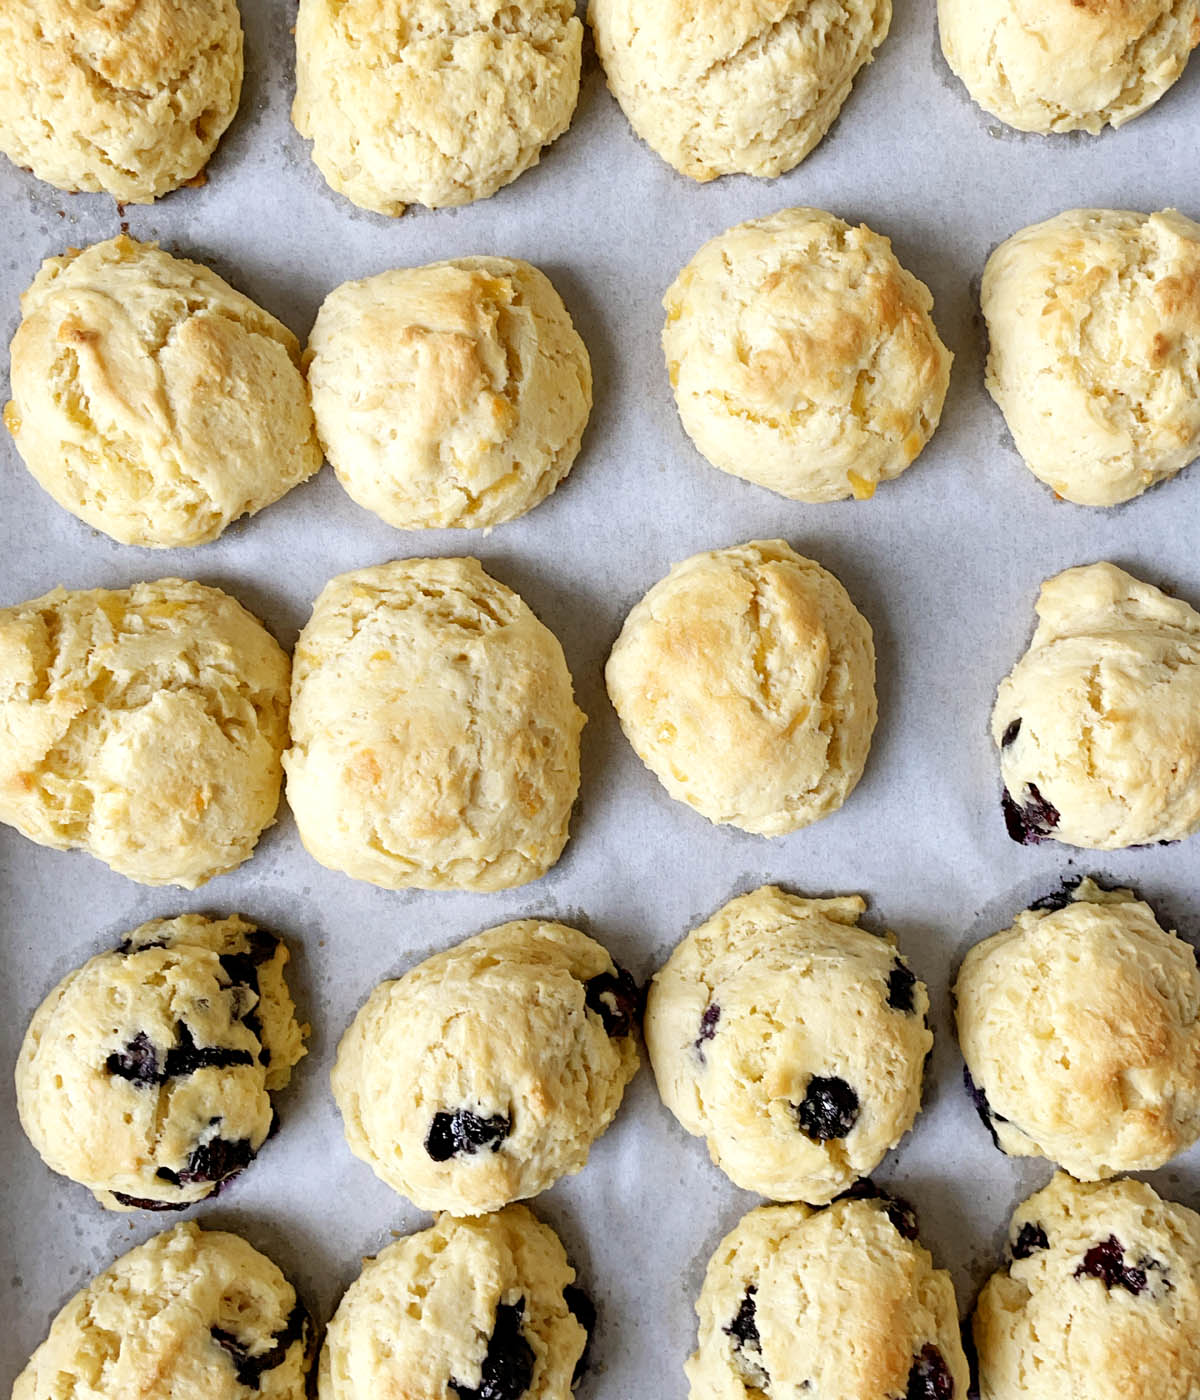 Baked cheese and blueberry tea scones on white parchment paper.